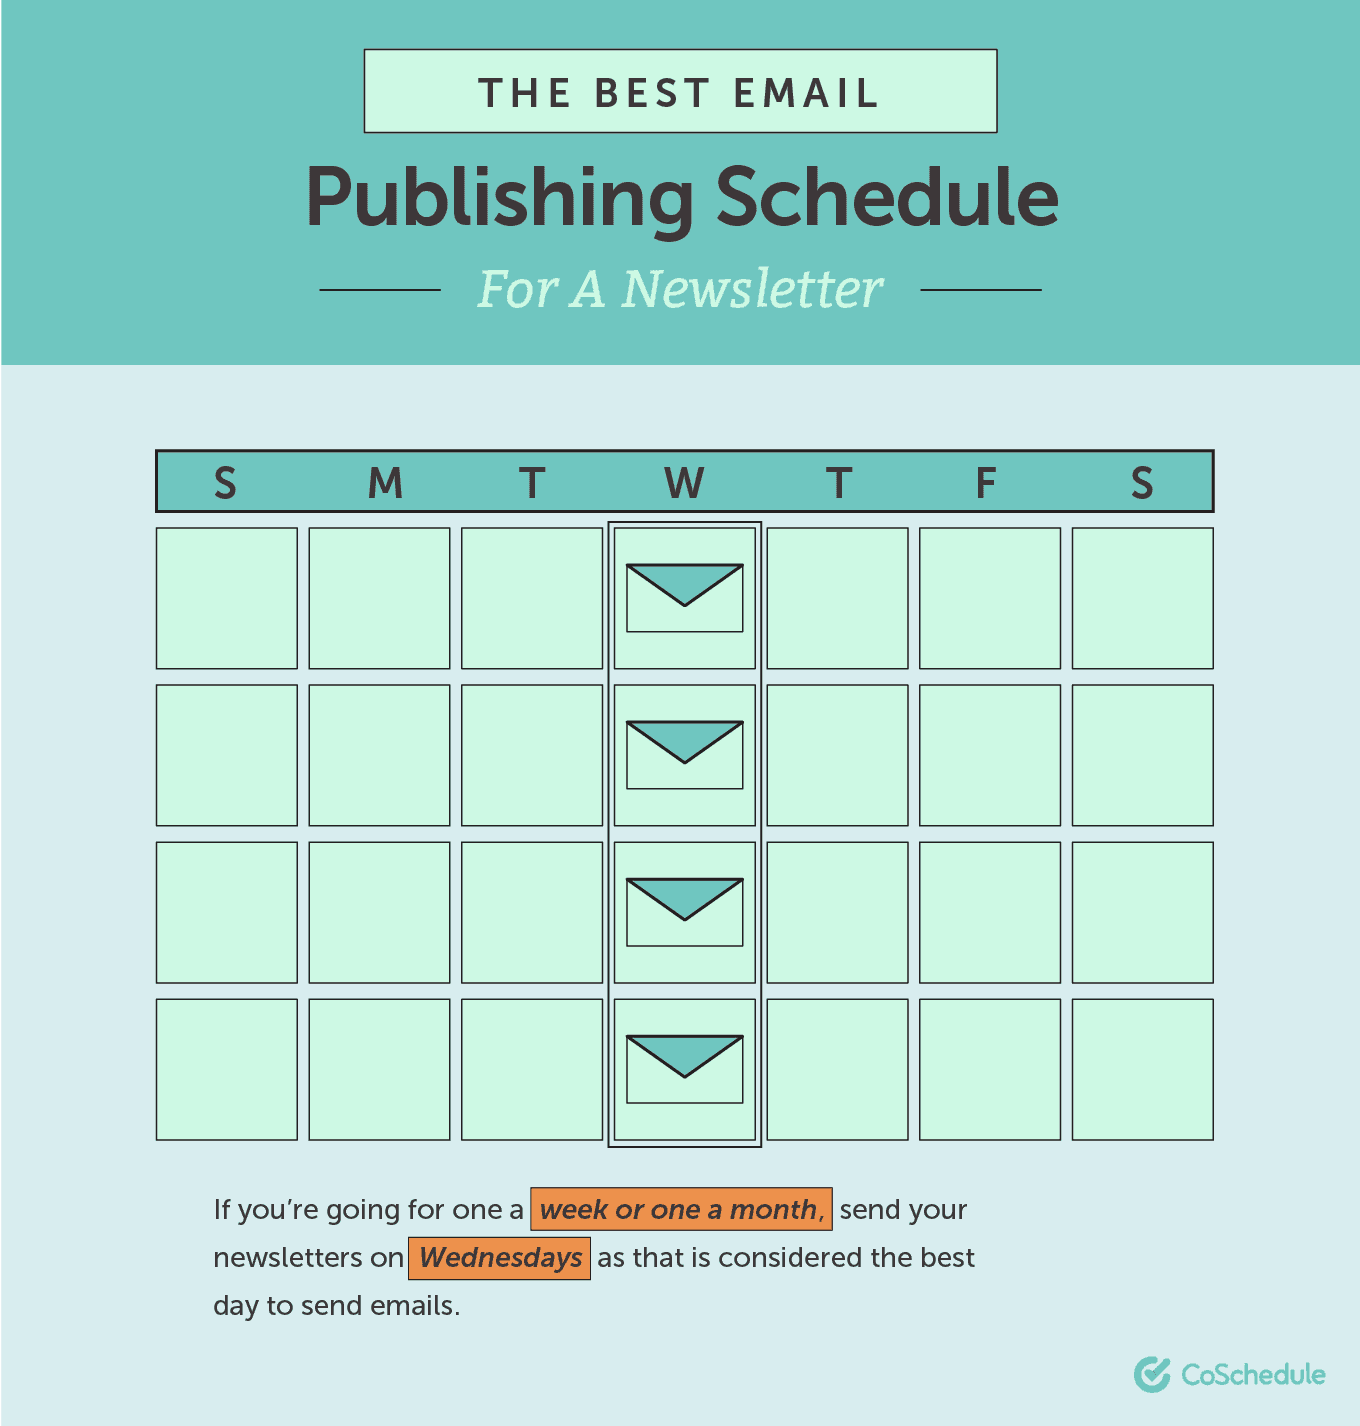 Best email publishing schedule for a newsletter